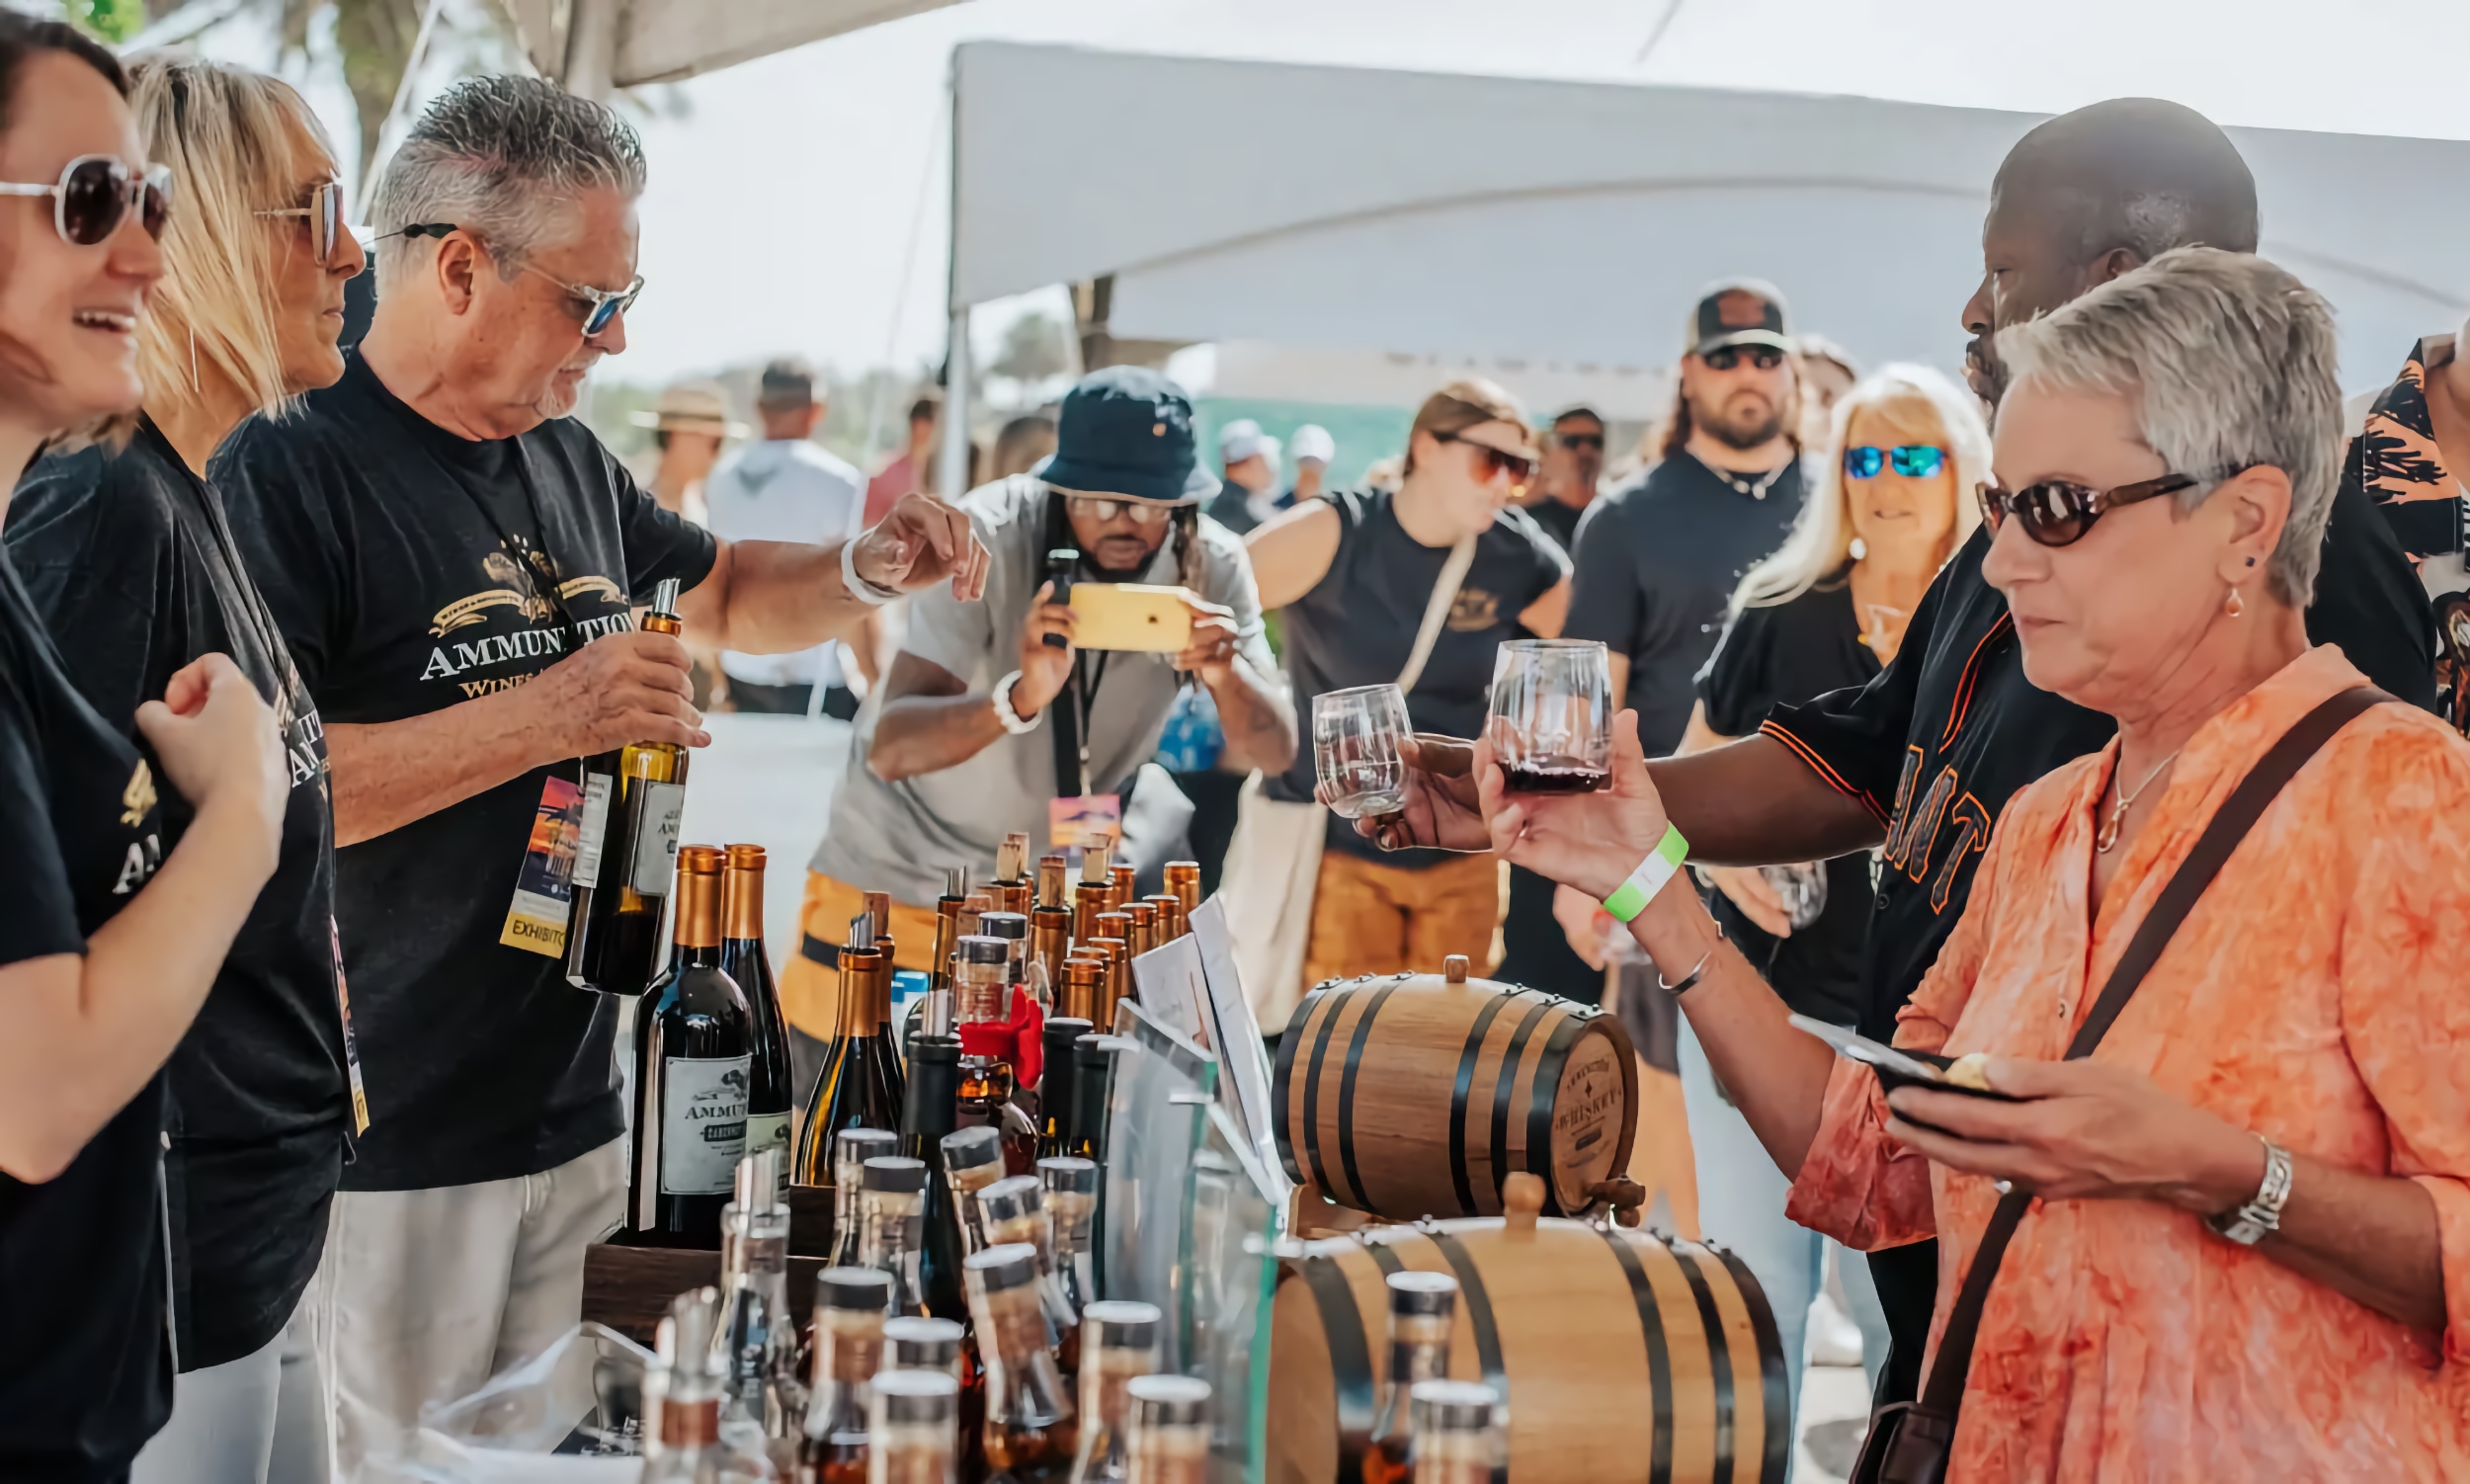 Vinters pouring wine for people attending a food and wine tasting festival in Vilano Beach